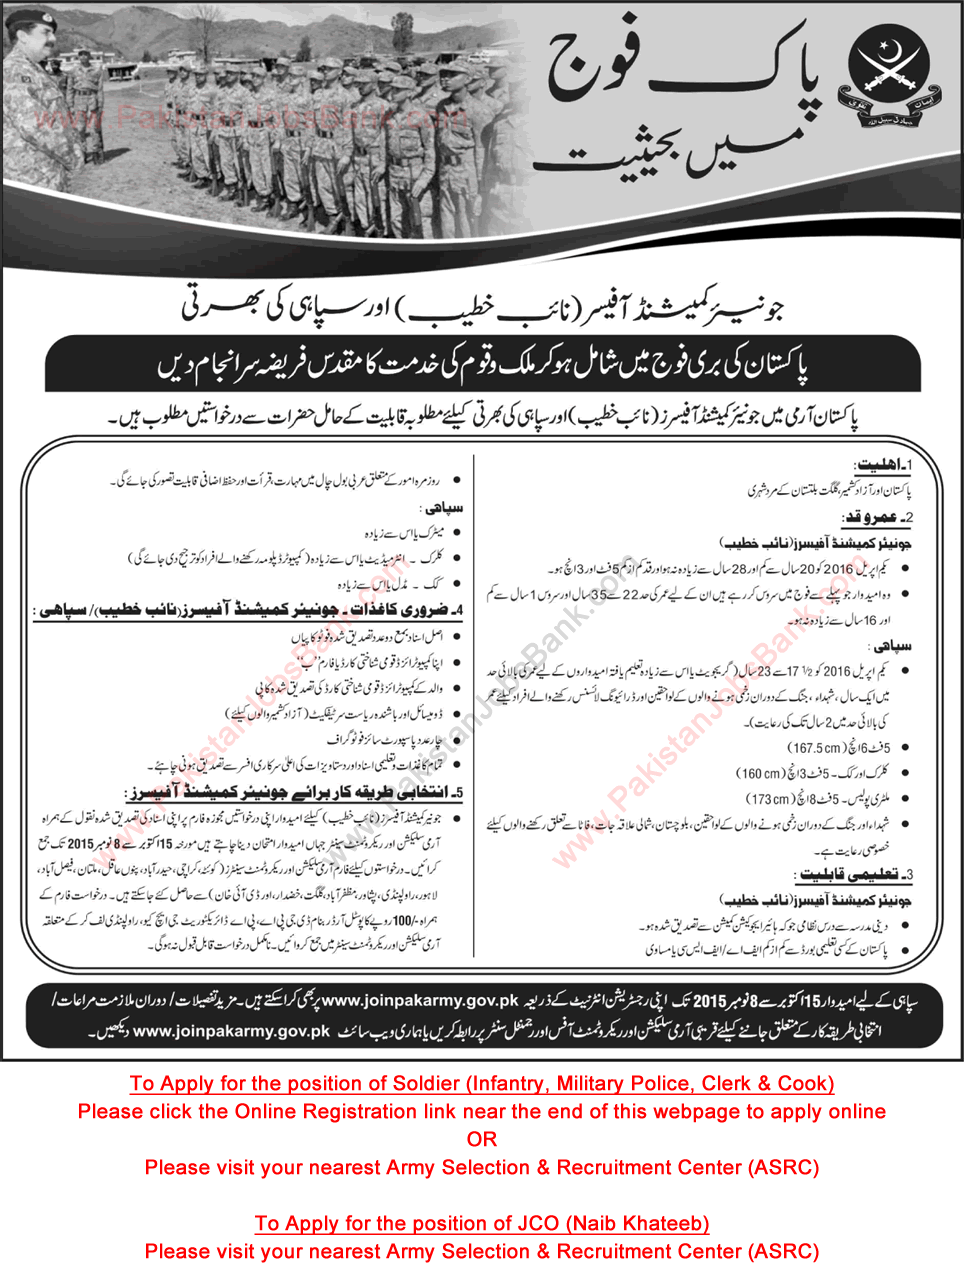 Join Pakistan Army as Soldier 2015 October Jobs Online Registration Latest